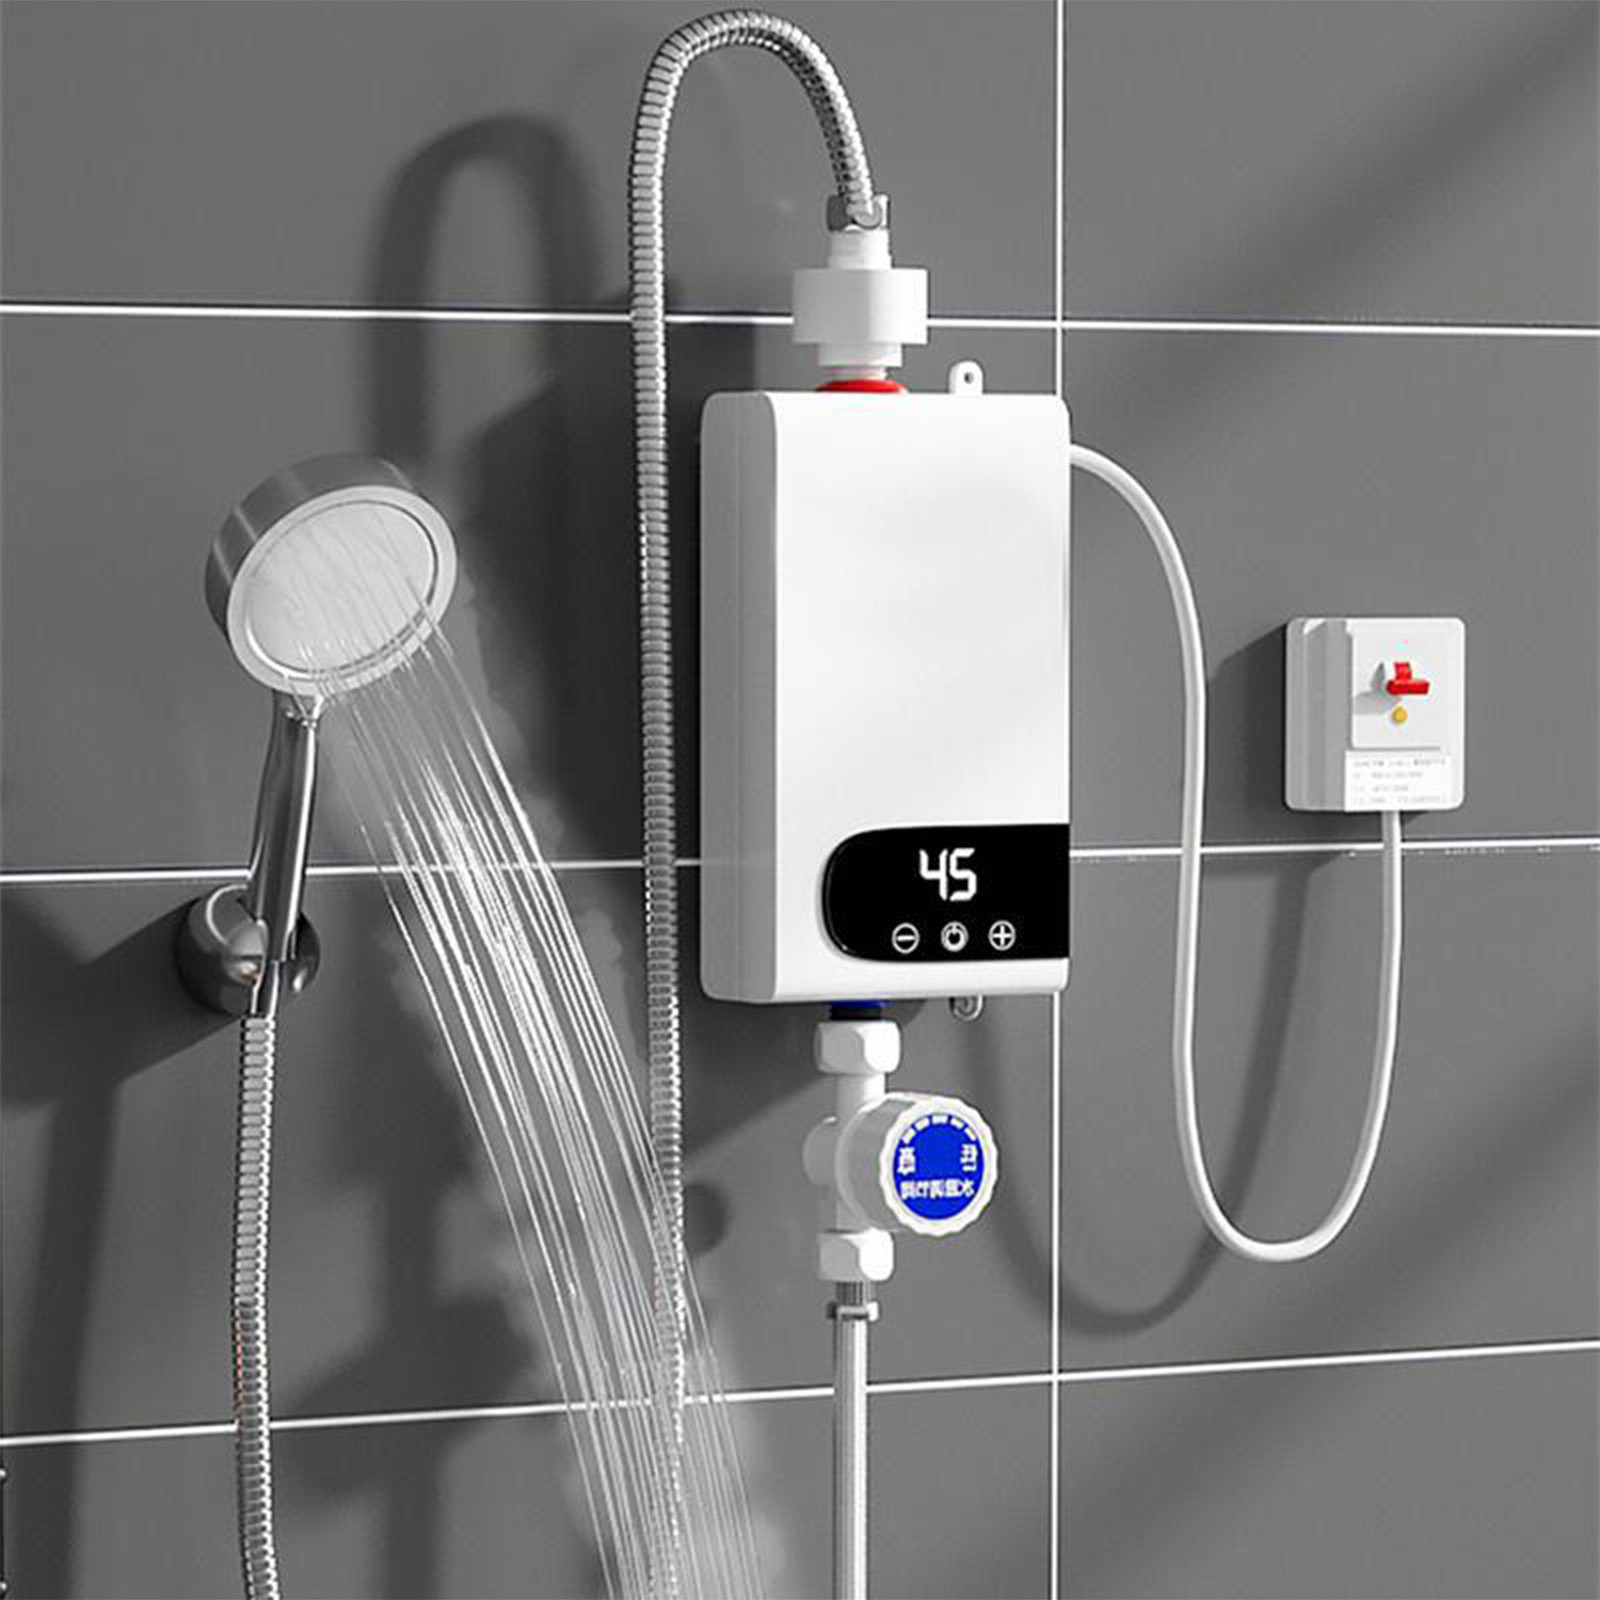 Instant Electric Hot Water Heater for Bathroom Kitchen Camping 3500w Small Frequency Conversion Constant Temperature Bath & Shower Artifact - image 1 of 2